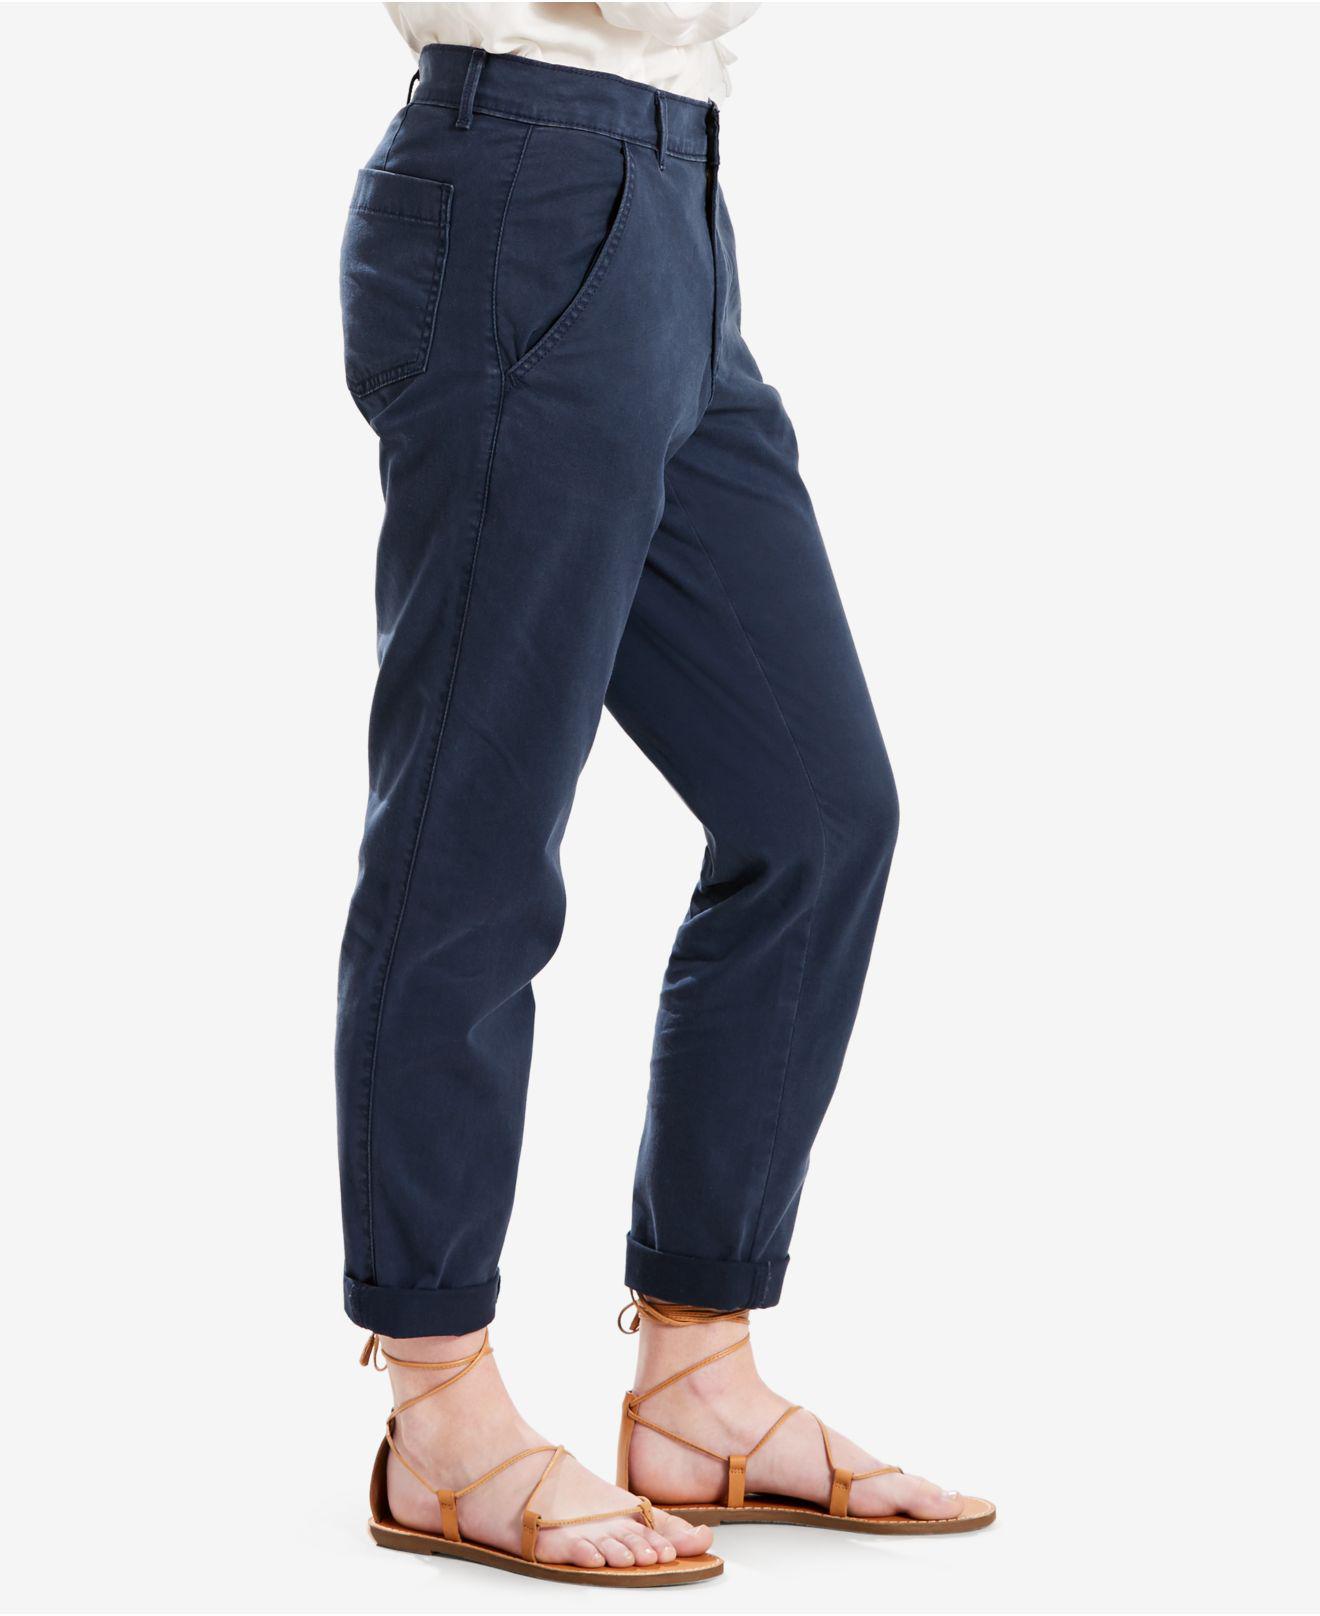 Levi's Cotton Twill Chino Pants in Navy (Blue) - Lyst